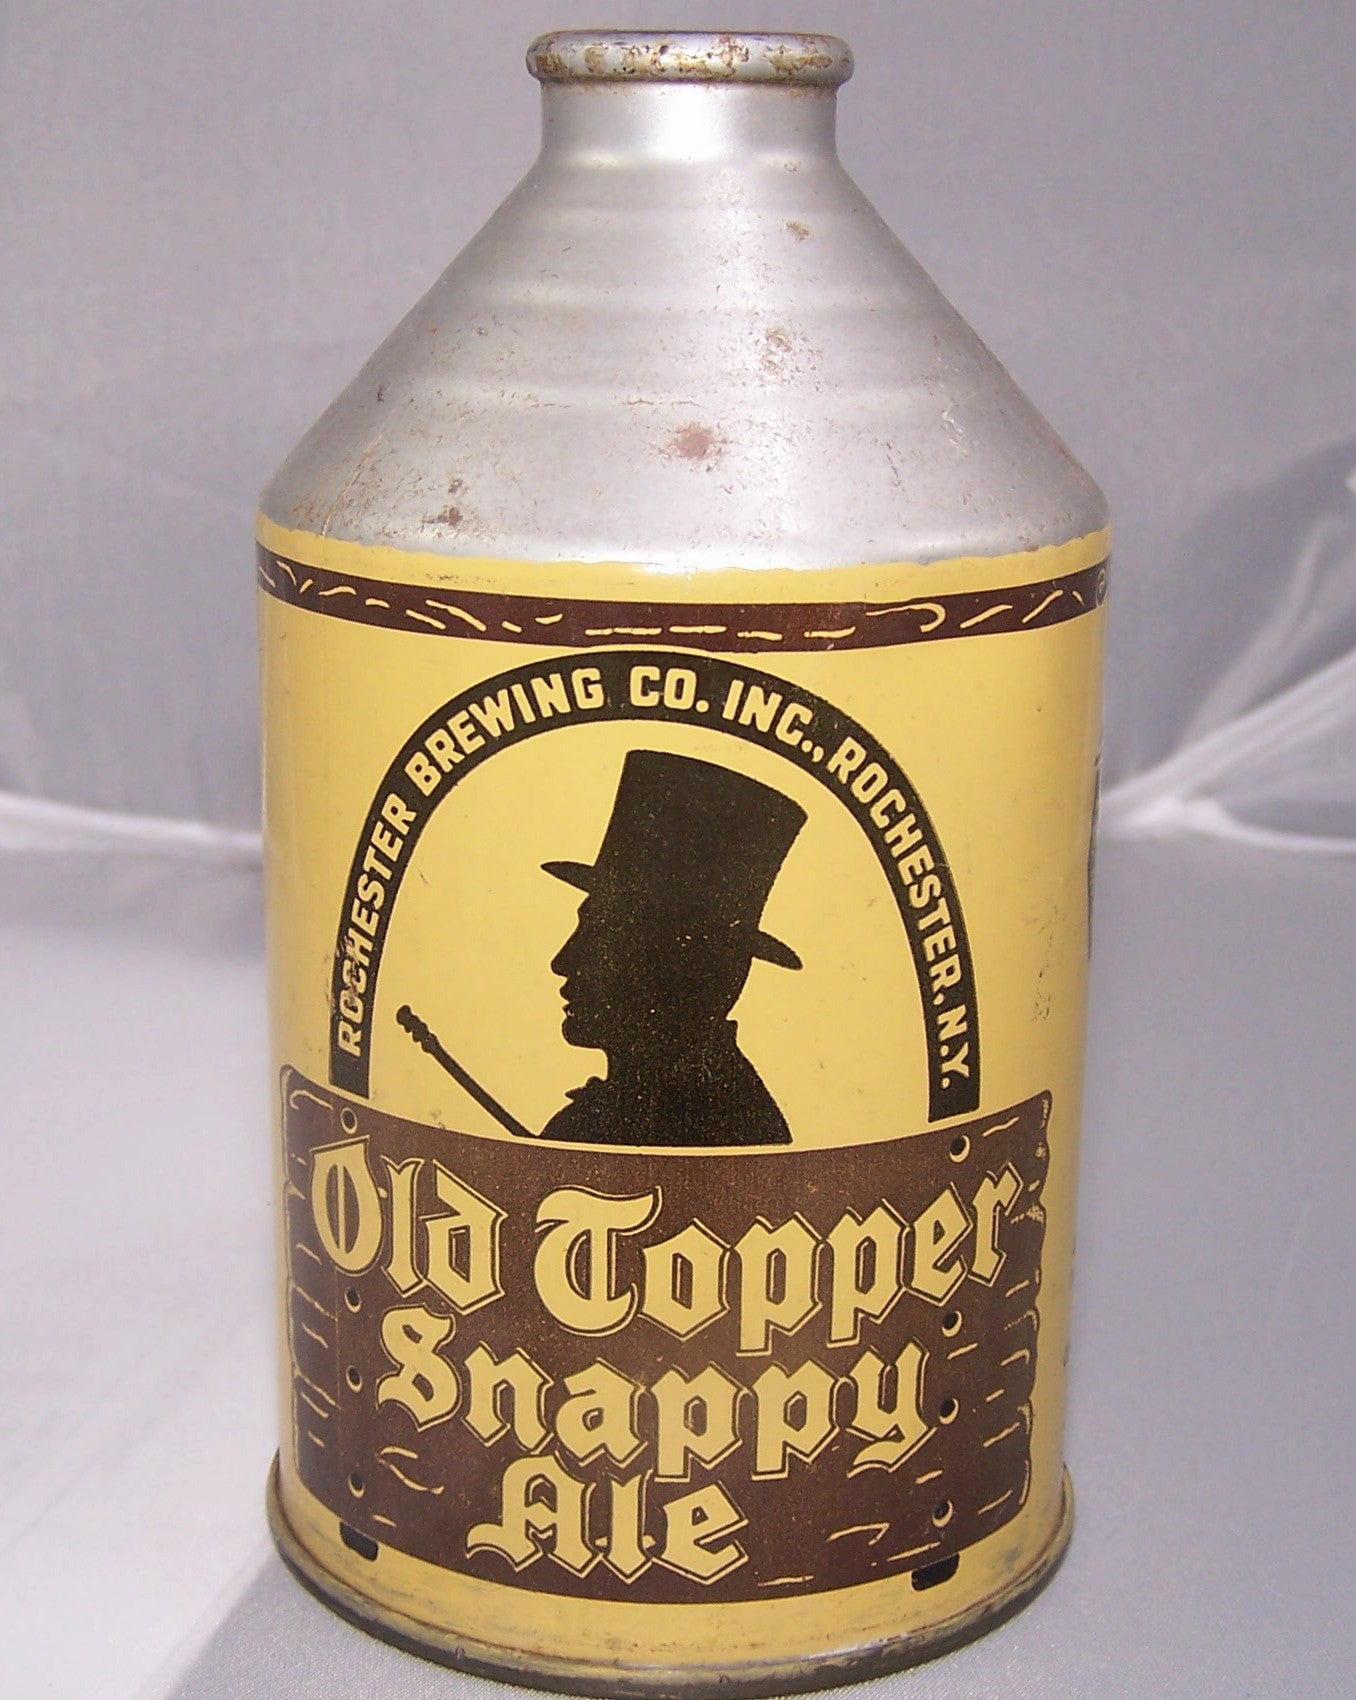 Old Topper Snappy Ale, USBC 197-29, Grade 1 Sold 3/2/15